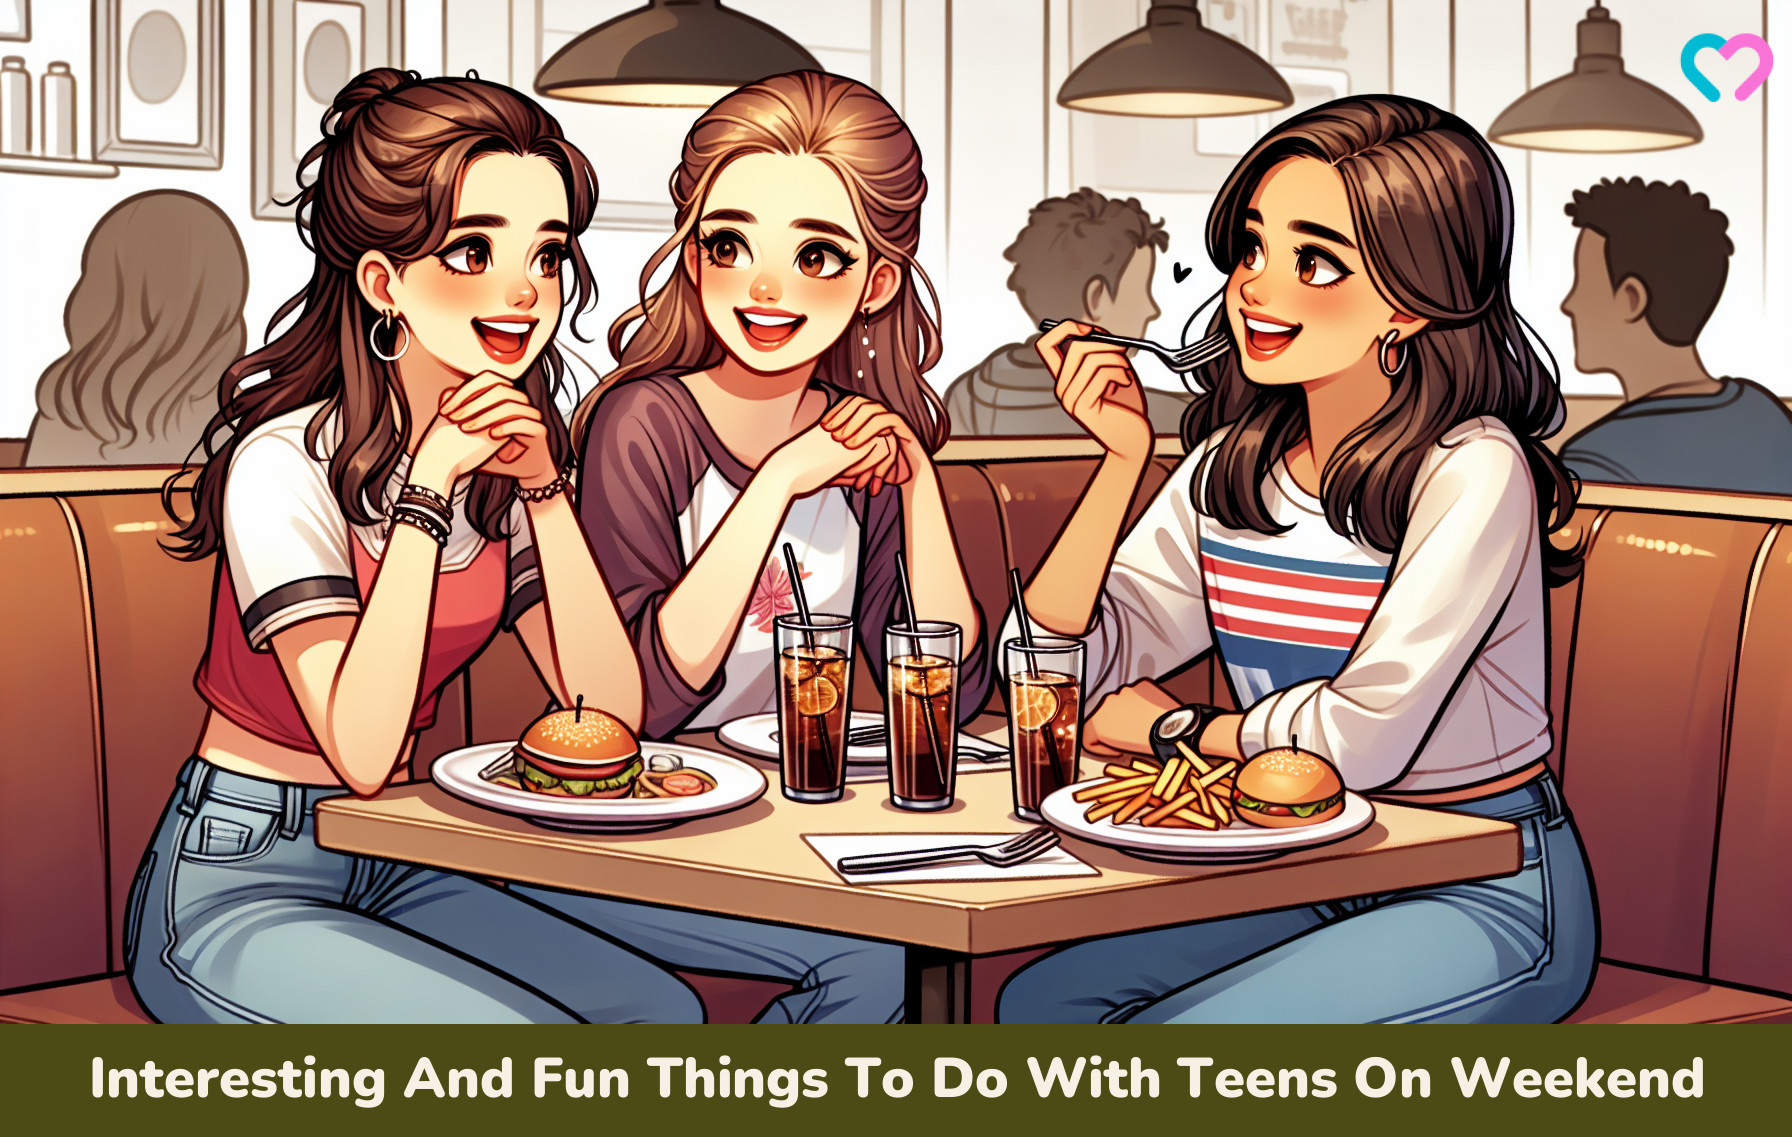 Fun Things To Do With Teens_illustration